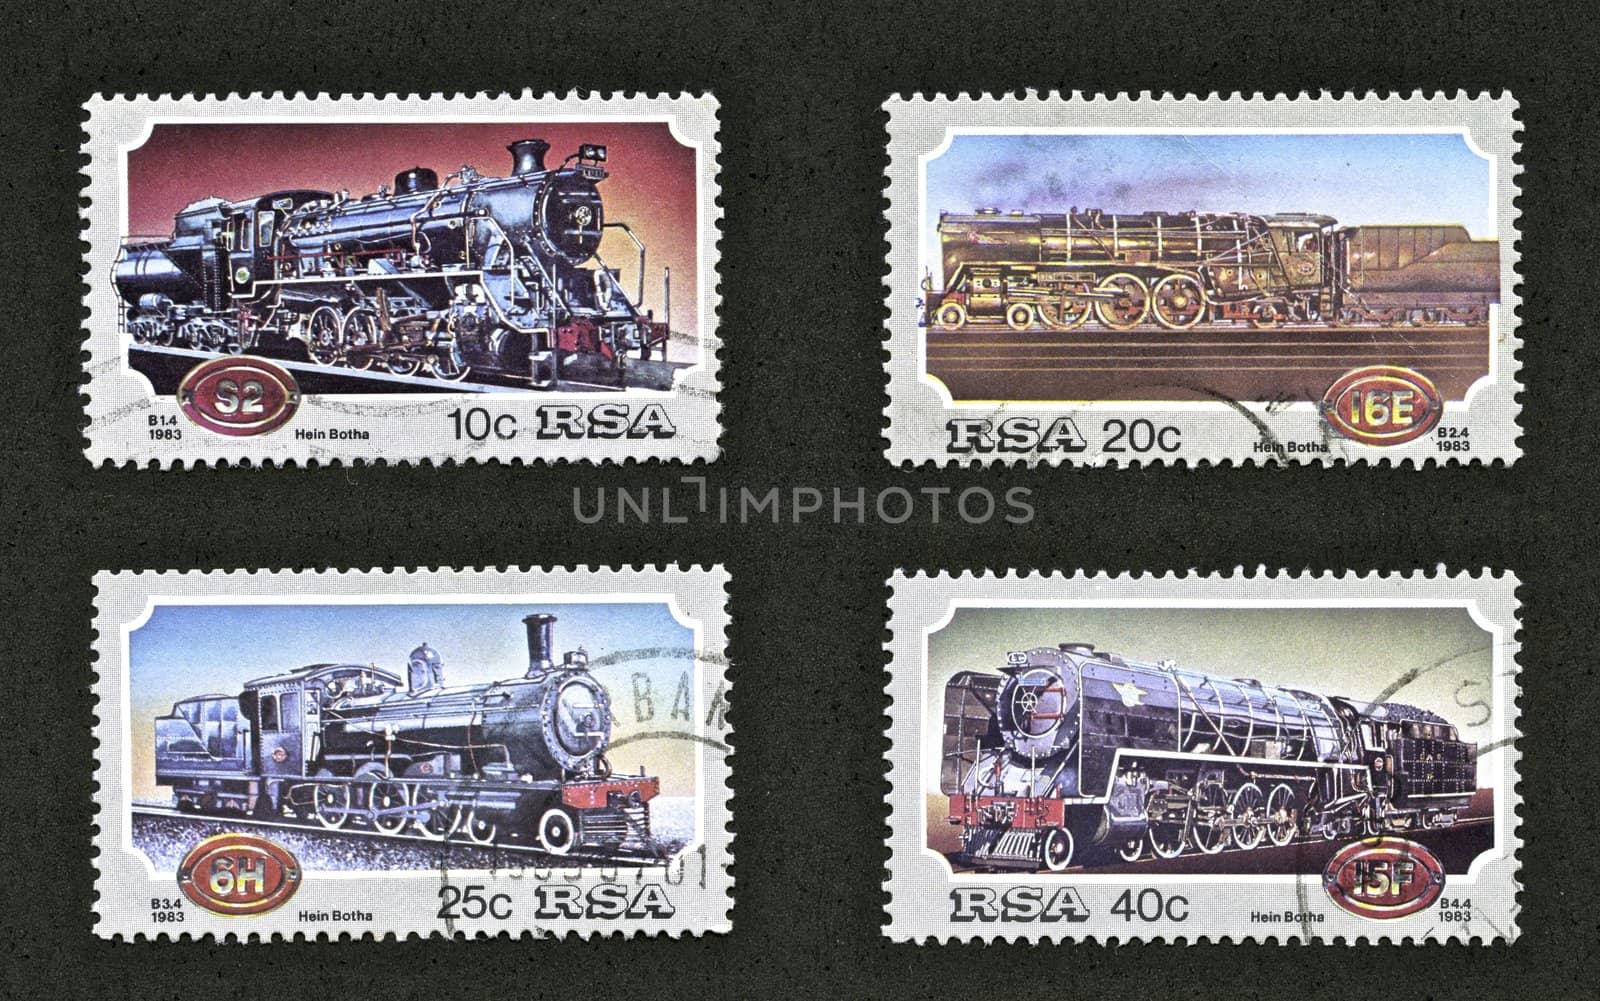 Train Stamps by instinia